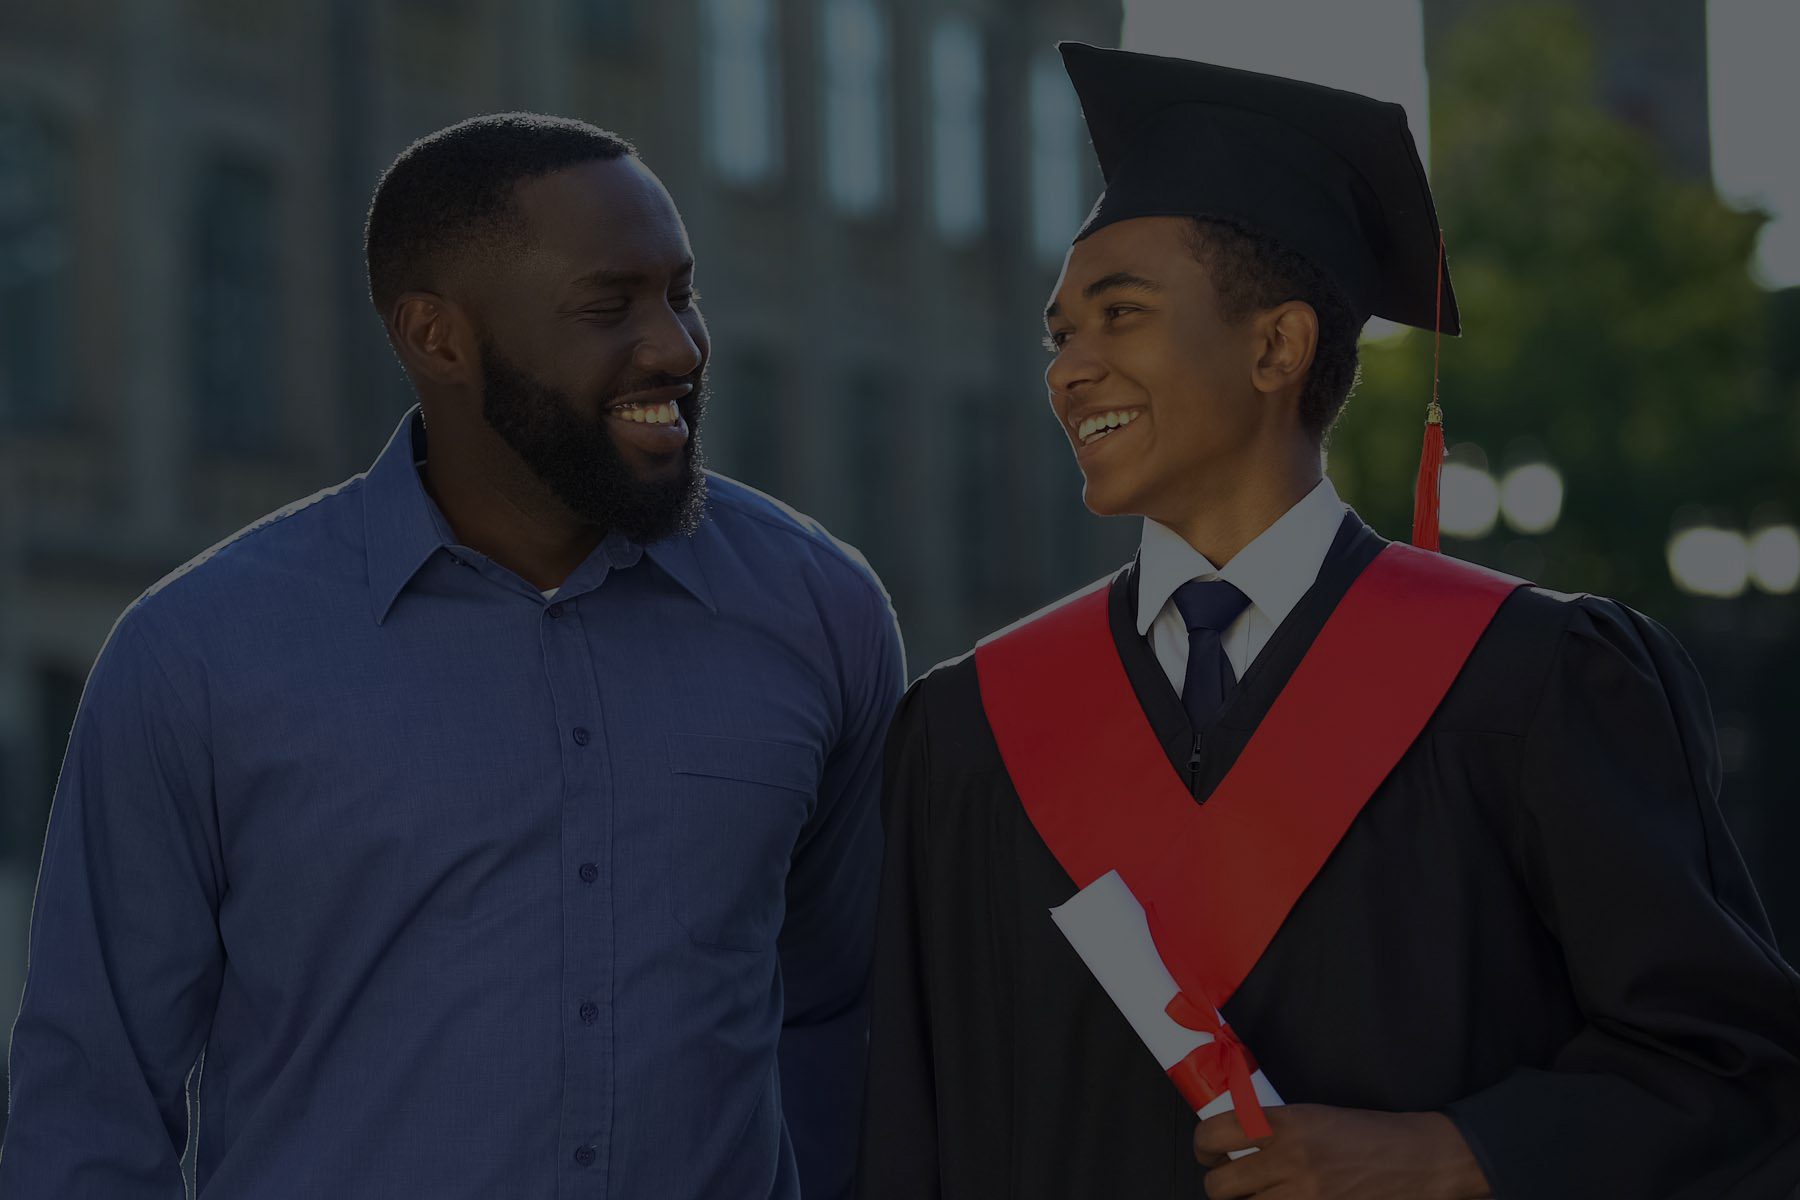 A father and son looking at each other smiling. The son has a graduation uniform and diploma in his hand